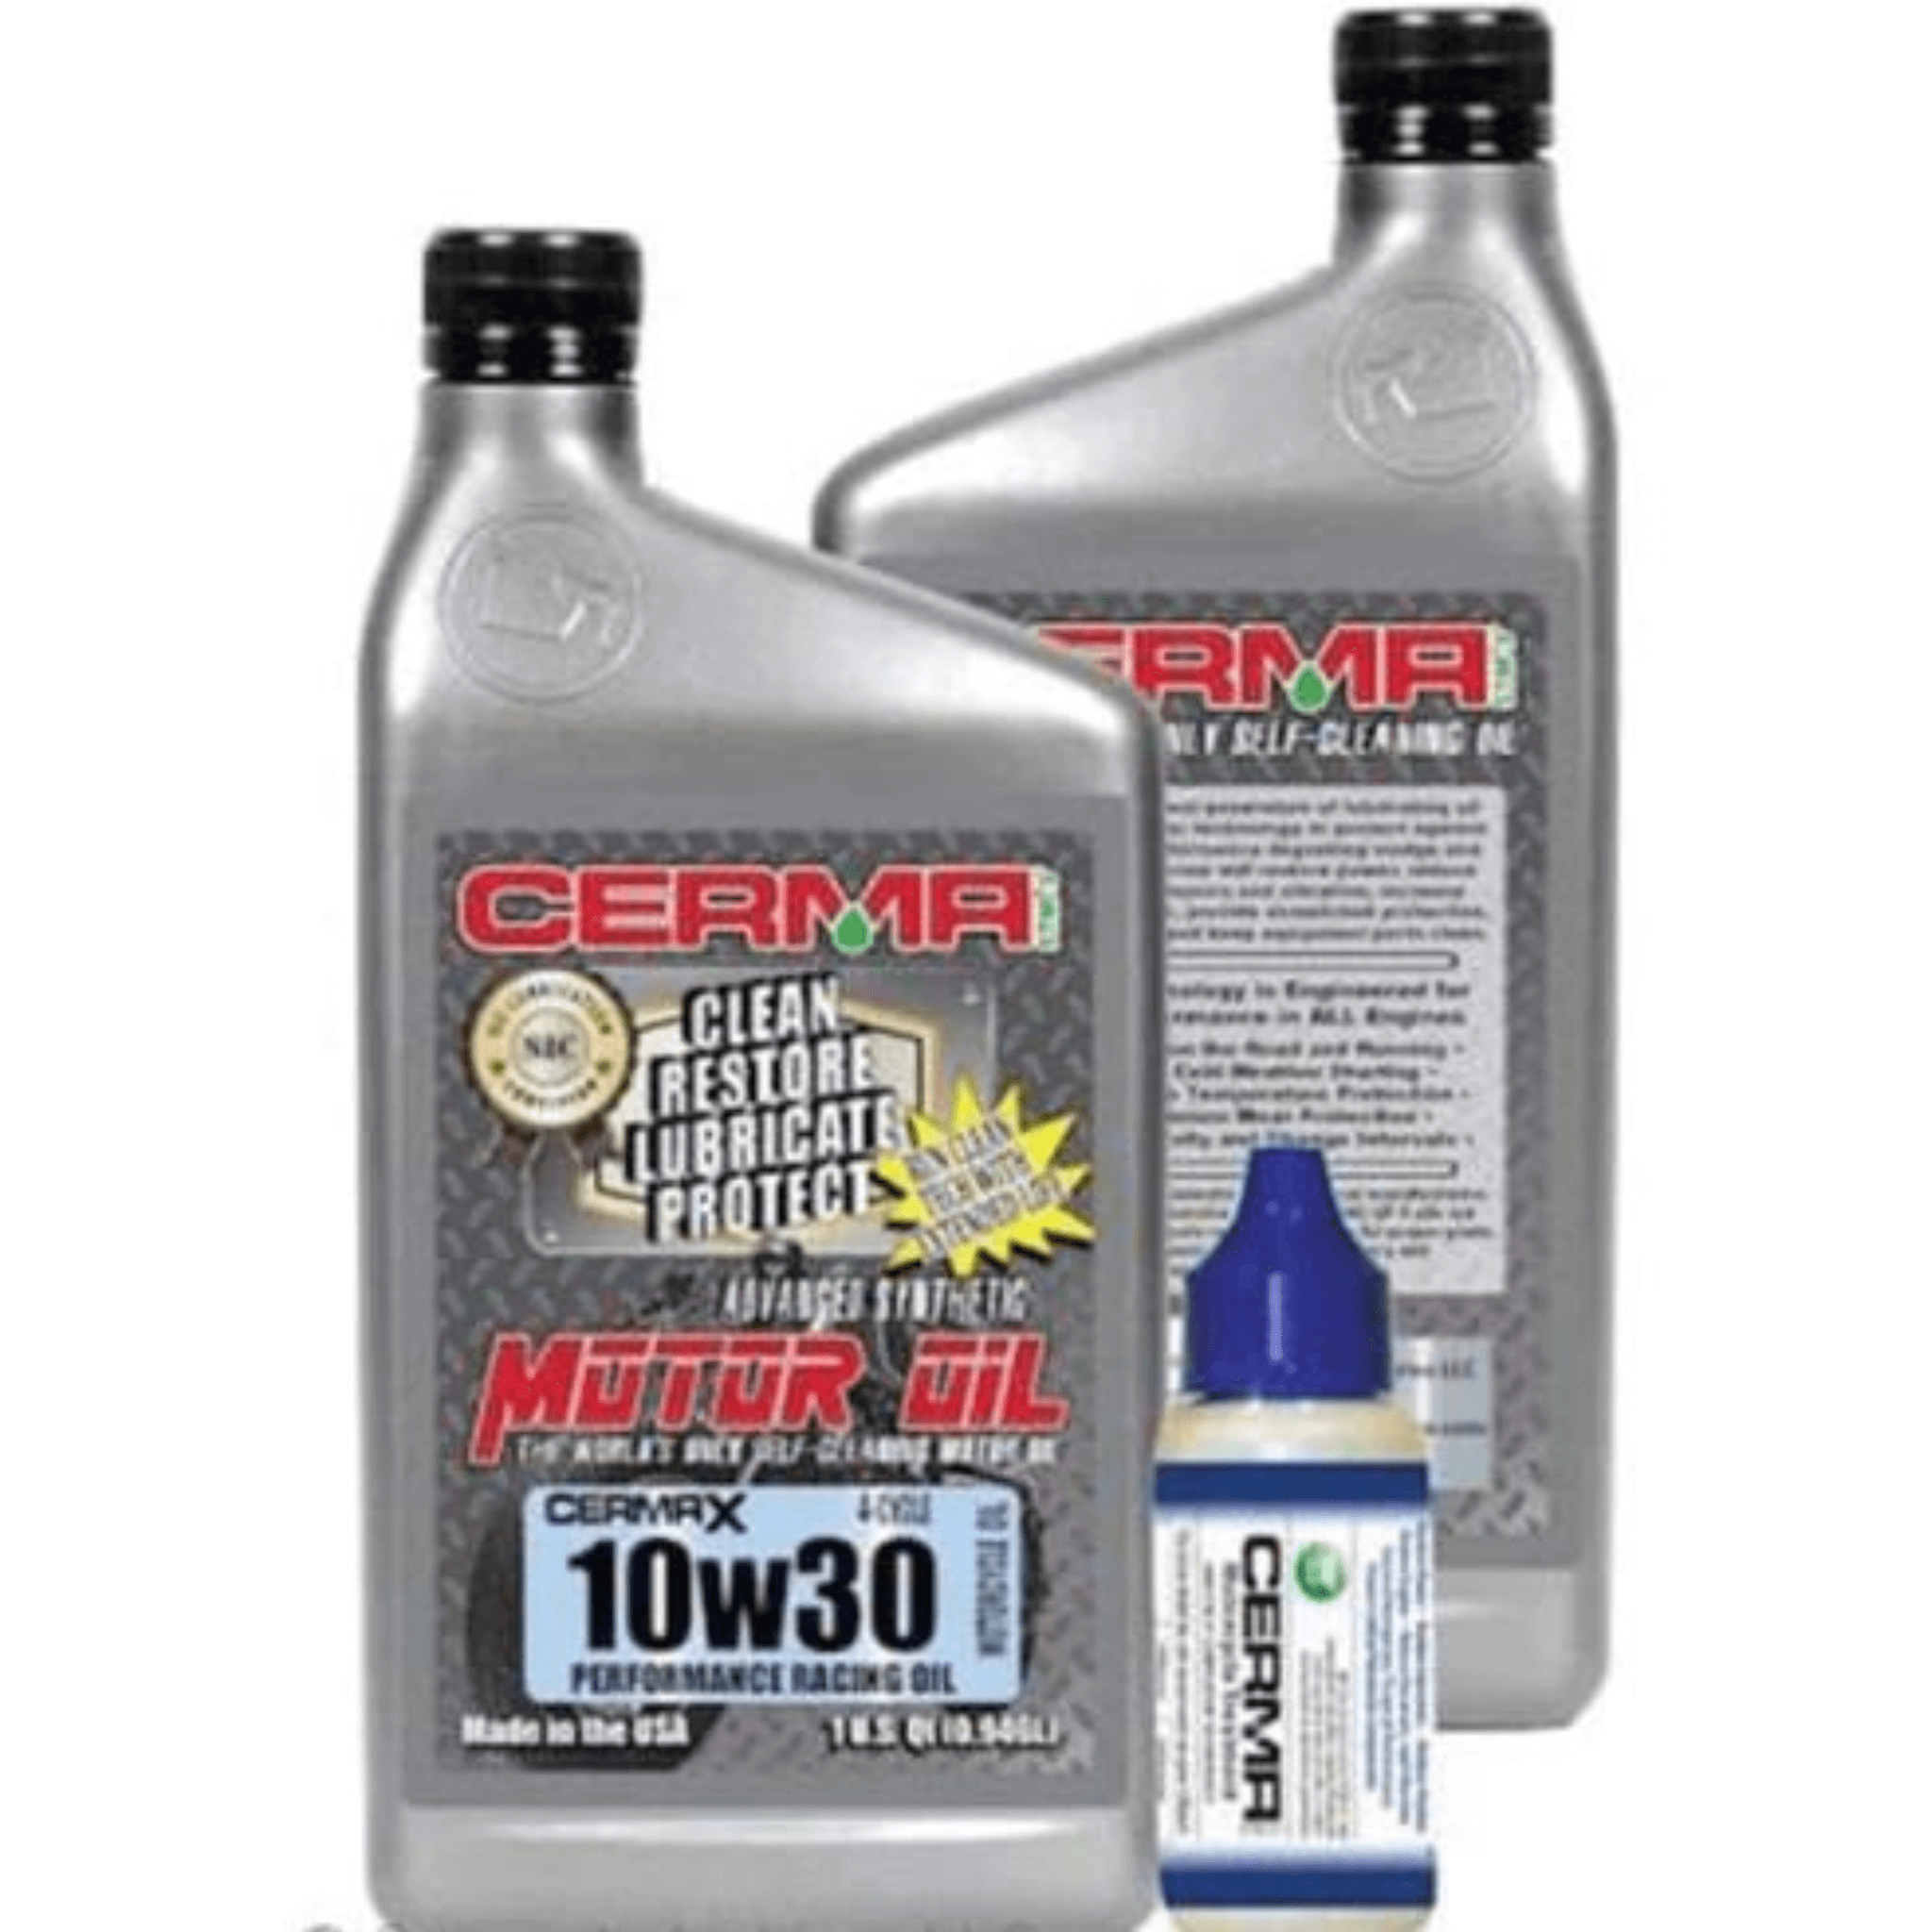 Experience Superior Performance with Cerma Motorcycle Oils and Treatment